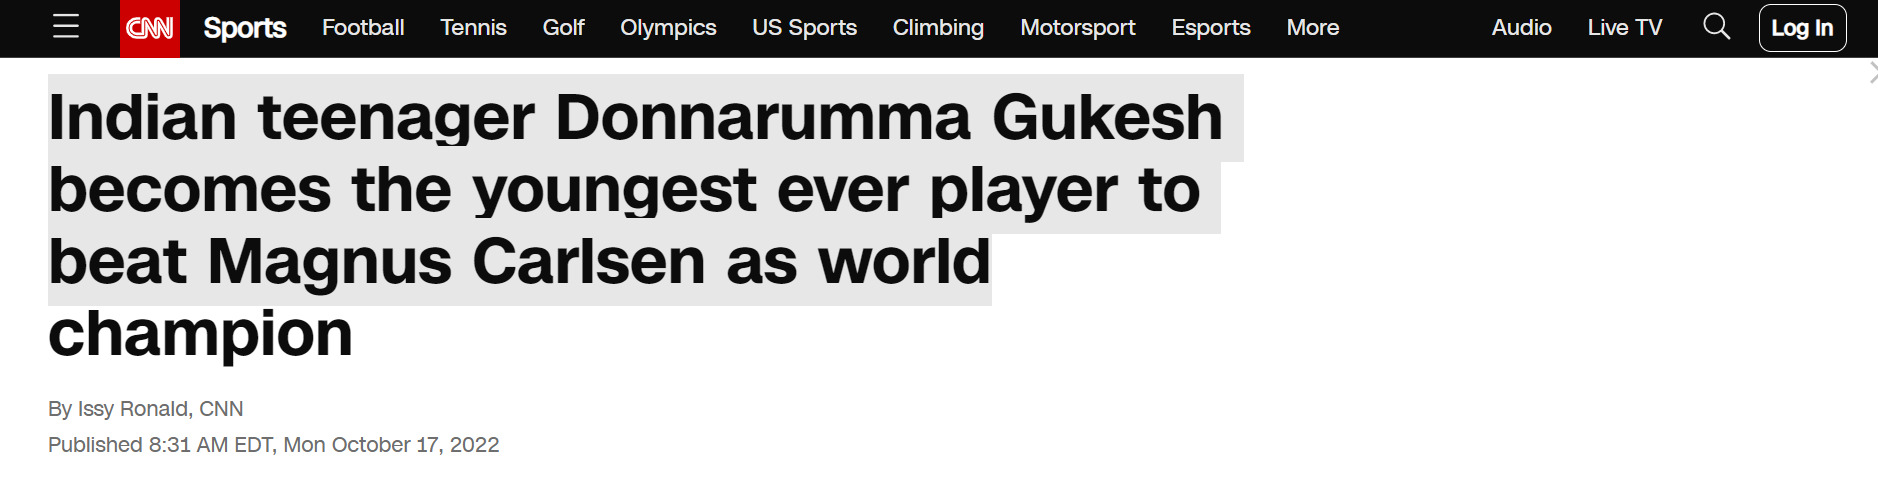 Indian teenager Donnarumma Gukesh becomes the youngest ever player